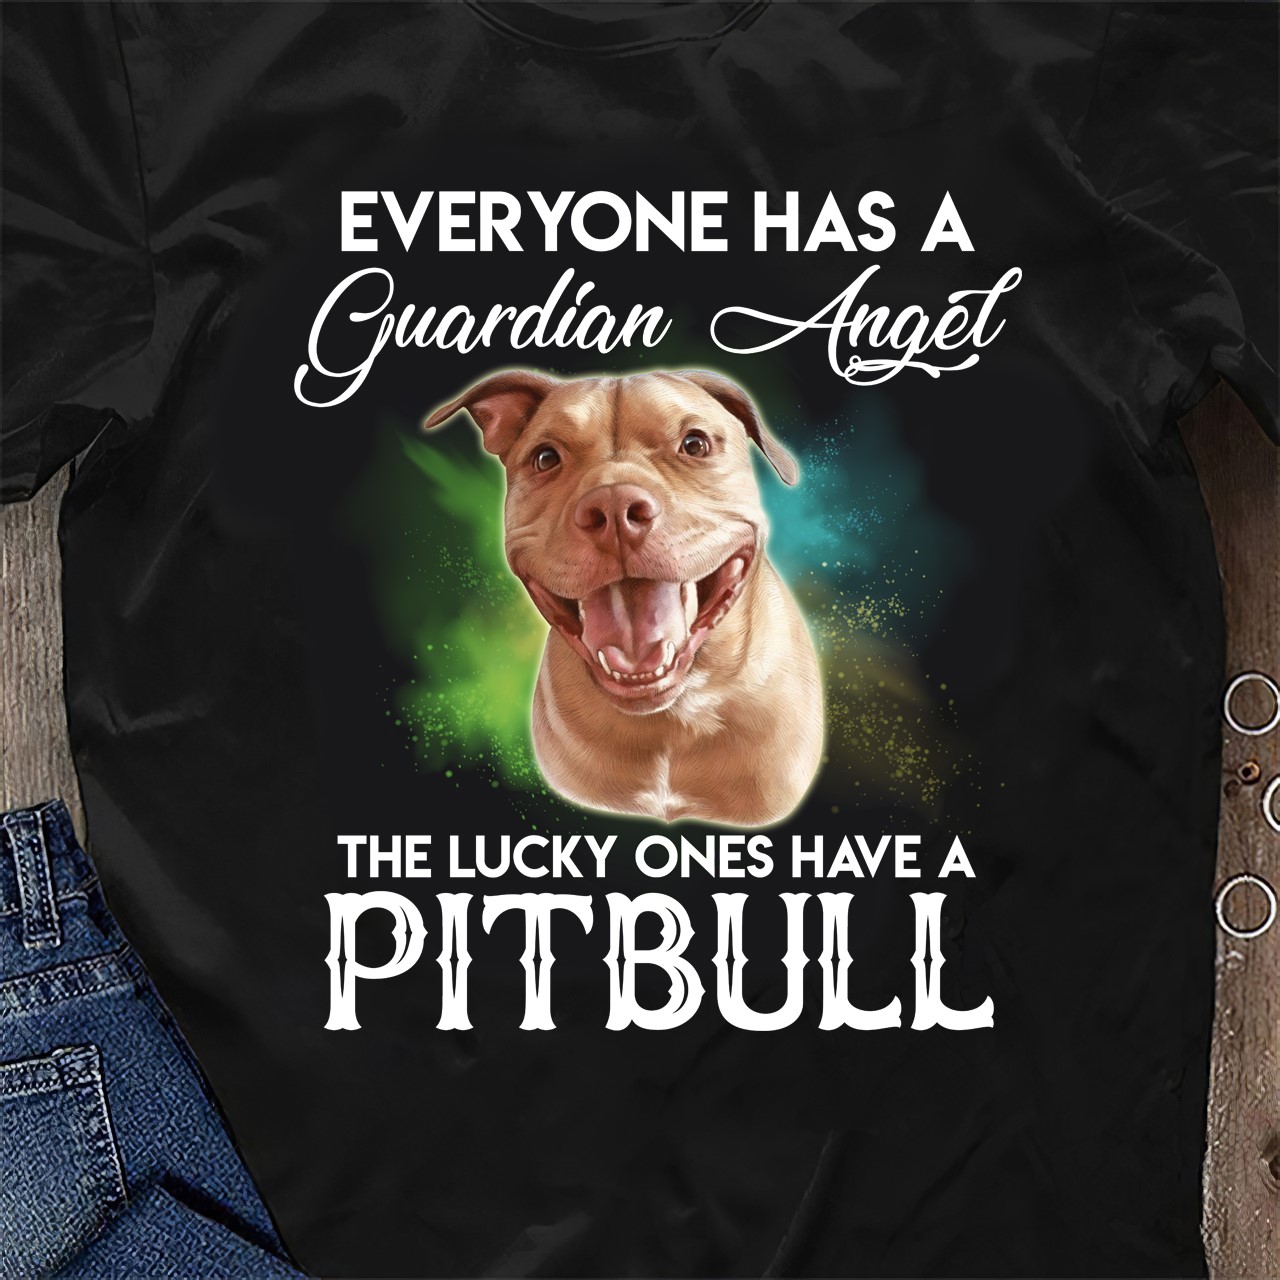 Everyone has a guardian angel the lucky ones have a pittbull